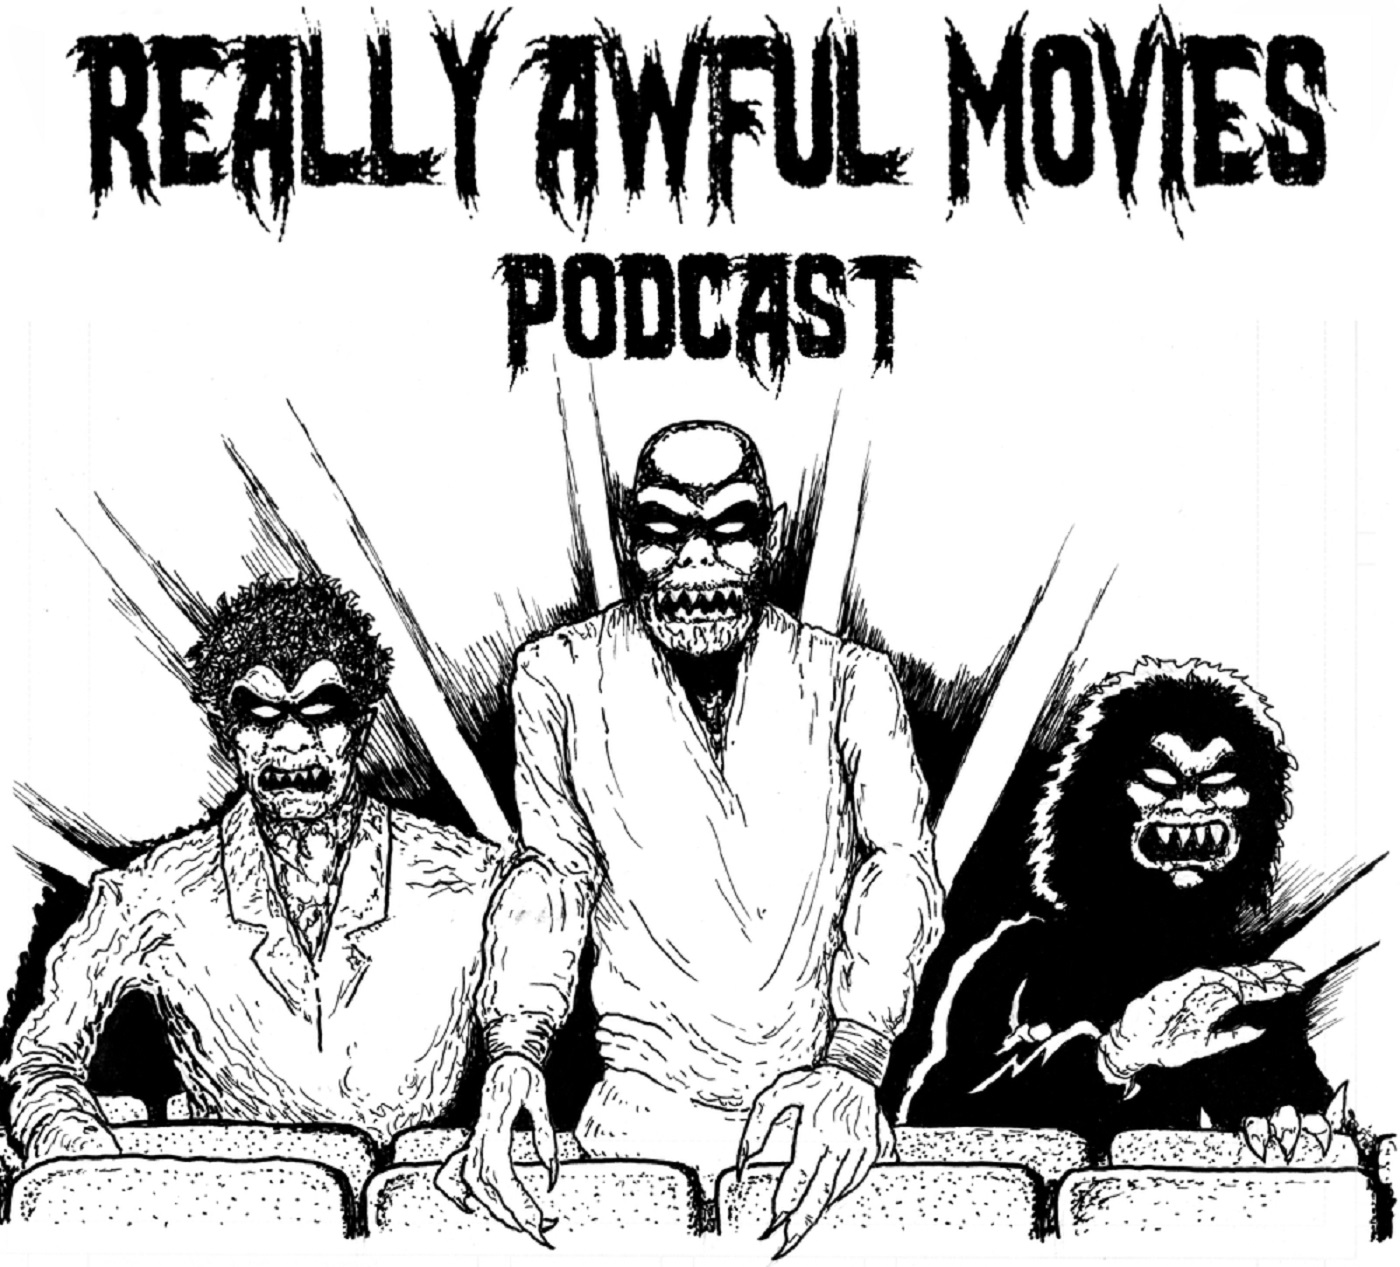 The Really Awful Movies Podcast